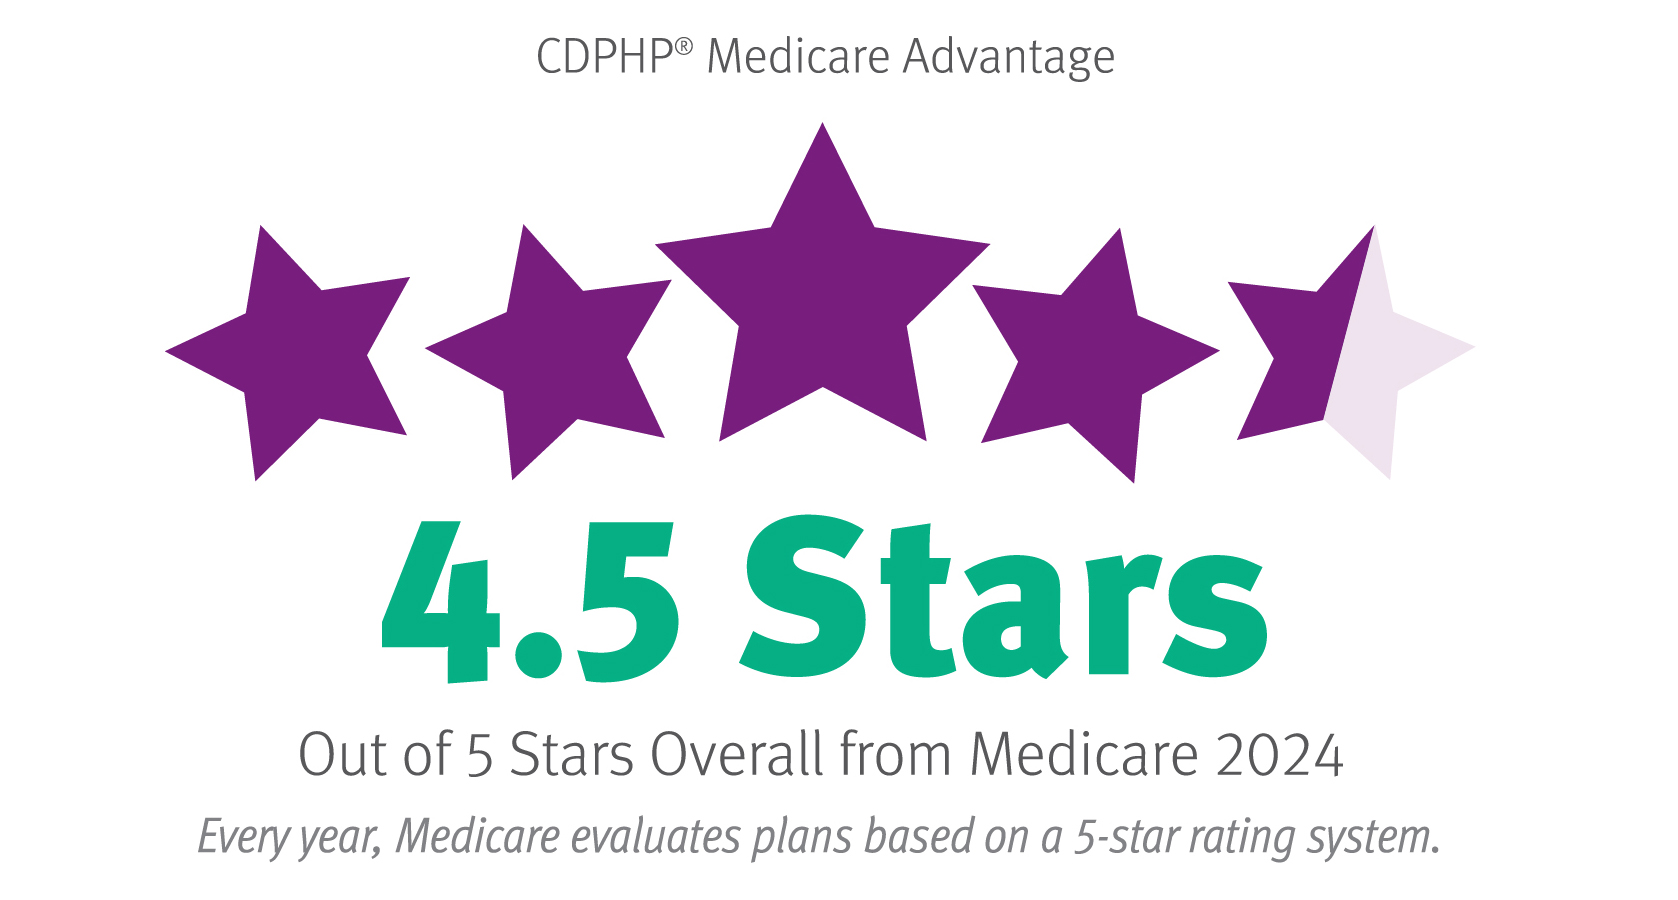 CDPHP Medicare Advantage. 4.5 Stars out of 5 stars overall from Medicare 2023. Every year, Medicare evaluates plans on a 5-star rating system.